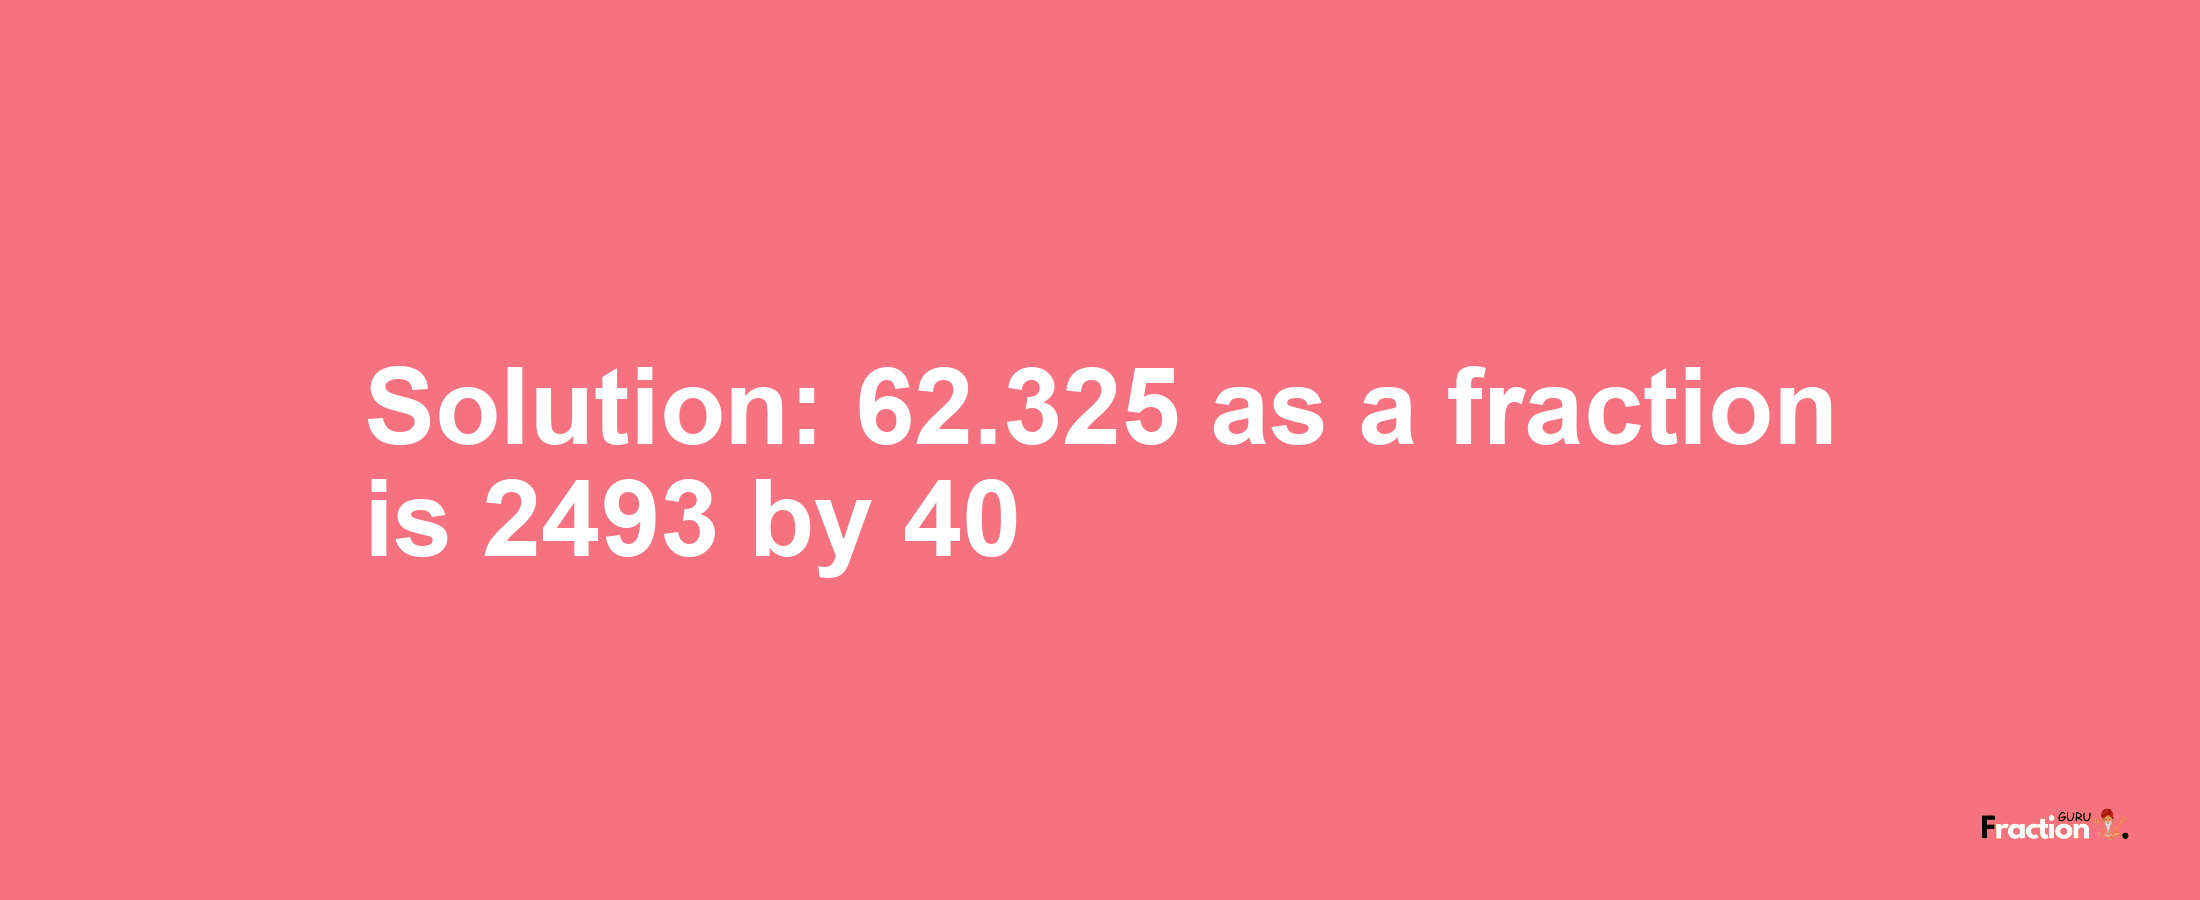 Solution:62.325 as a fraction is 2493/40